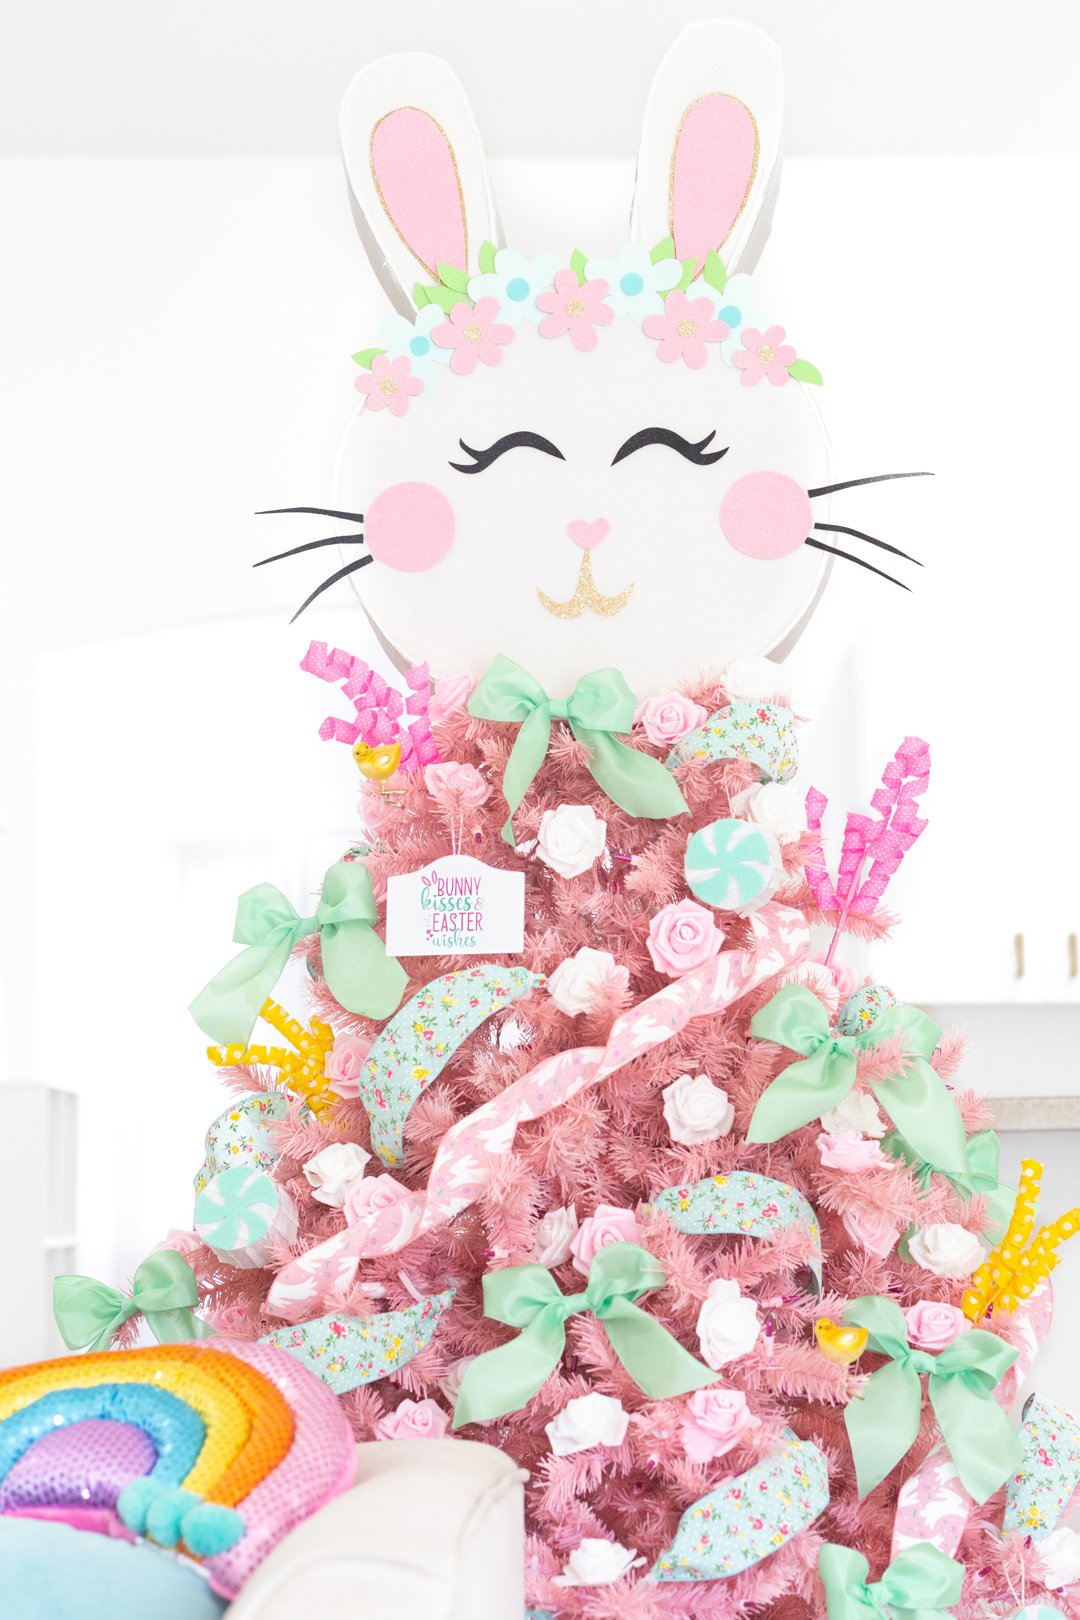 pretty pastel easter christmas tree. light pink tree with variety of pastel decorations. mint colored bows. pink and white faux flowers. Pink bunny ribbon. Large bunny pinata tree topper.